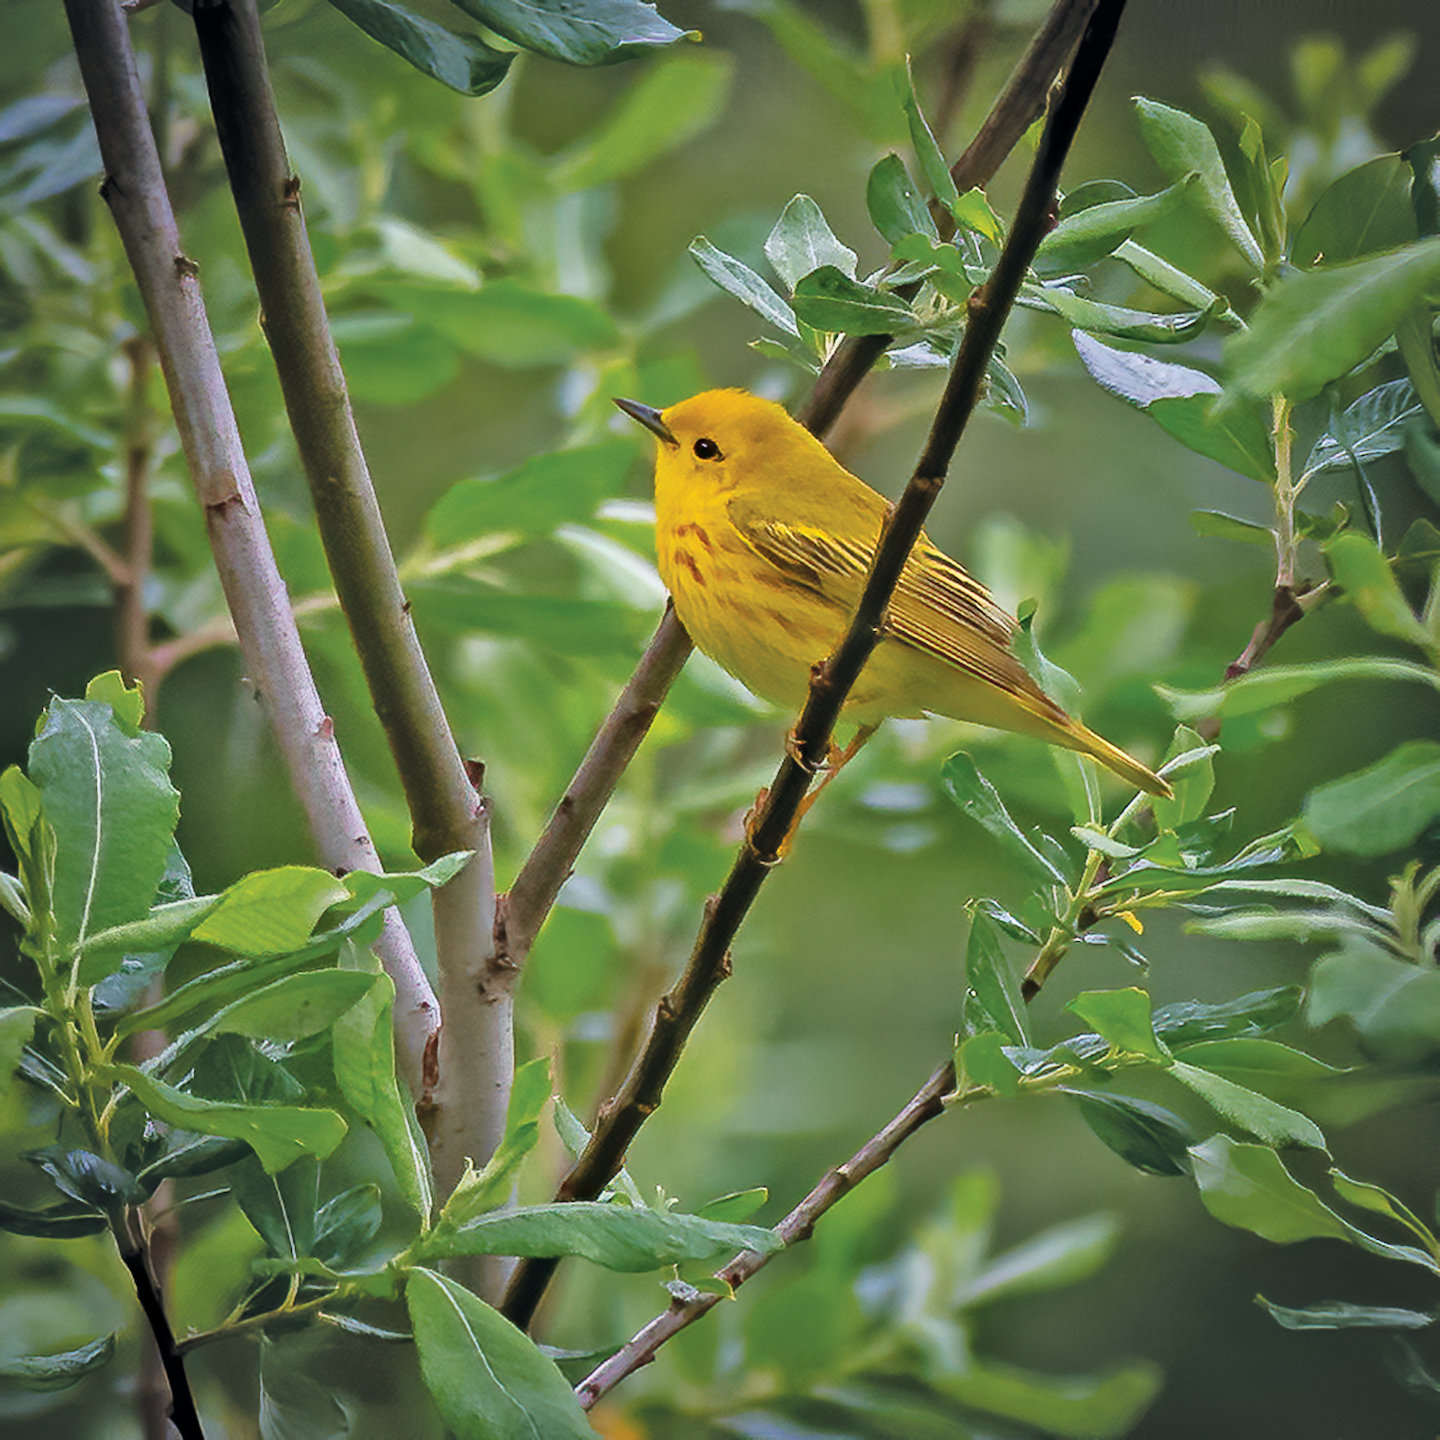 Yellow warblers, a neotropical migrant bird species, were spotted on several trips last spring in the Upper Tarboo Creek wetlands. The planned restoration of some wetland areas, by planting willow and other wetland shrubs to replace invasive reed canary grass, will help this species.